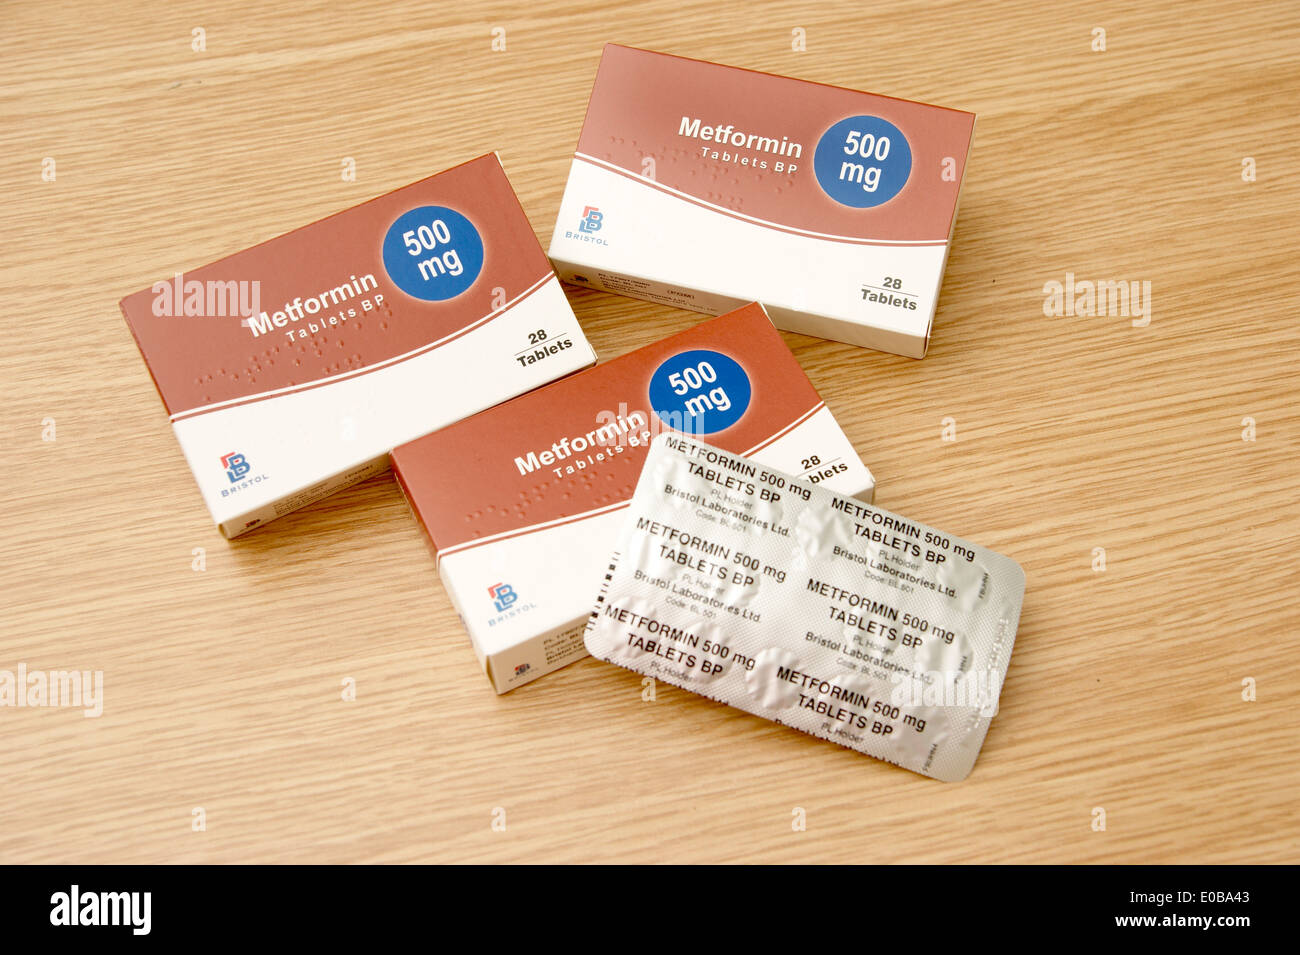 Boxes of Metformin hydrochloride prolonged released tablets for treating diabetes by regulating the level of sugar in the blood Stock Photo